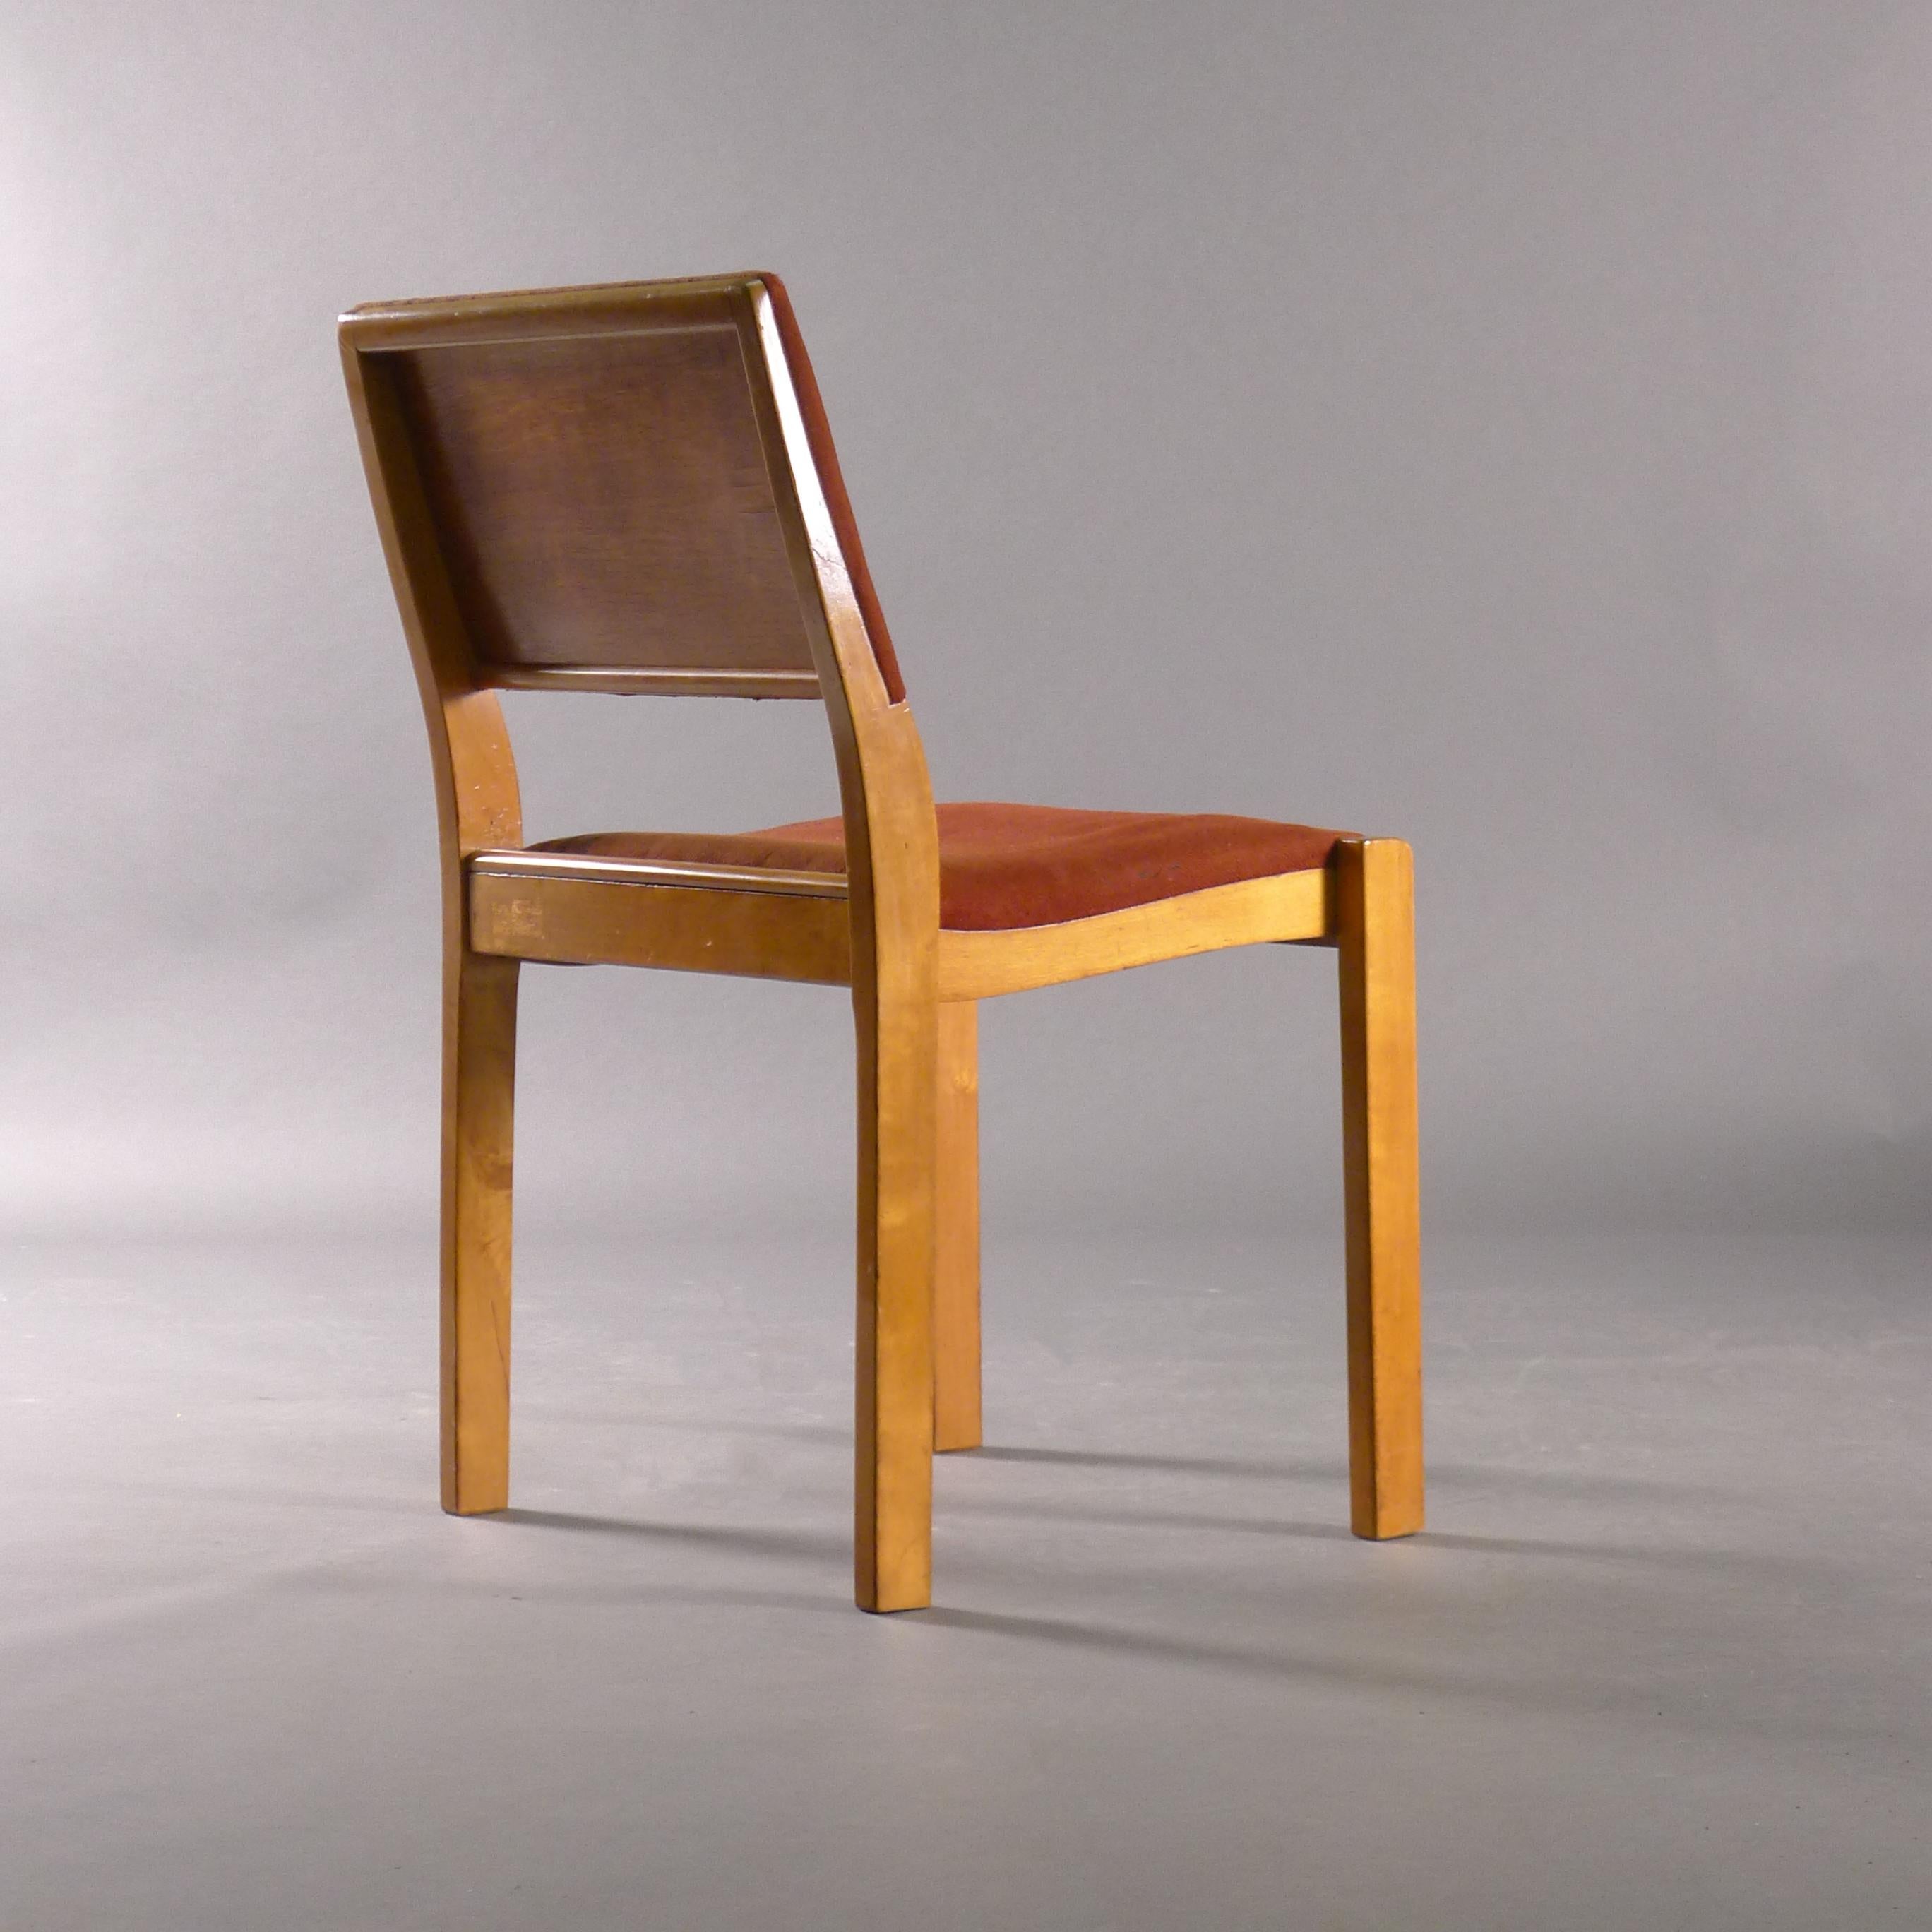 Finnish Alvar Aalto model 611 stacking chair by Finmar, fabric attributed to Aino Aalto For Sale